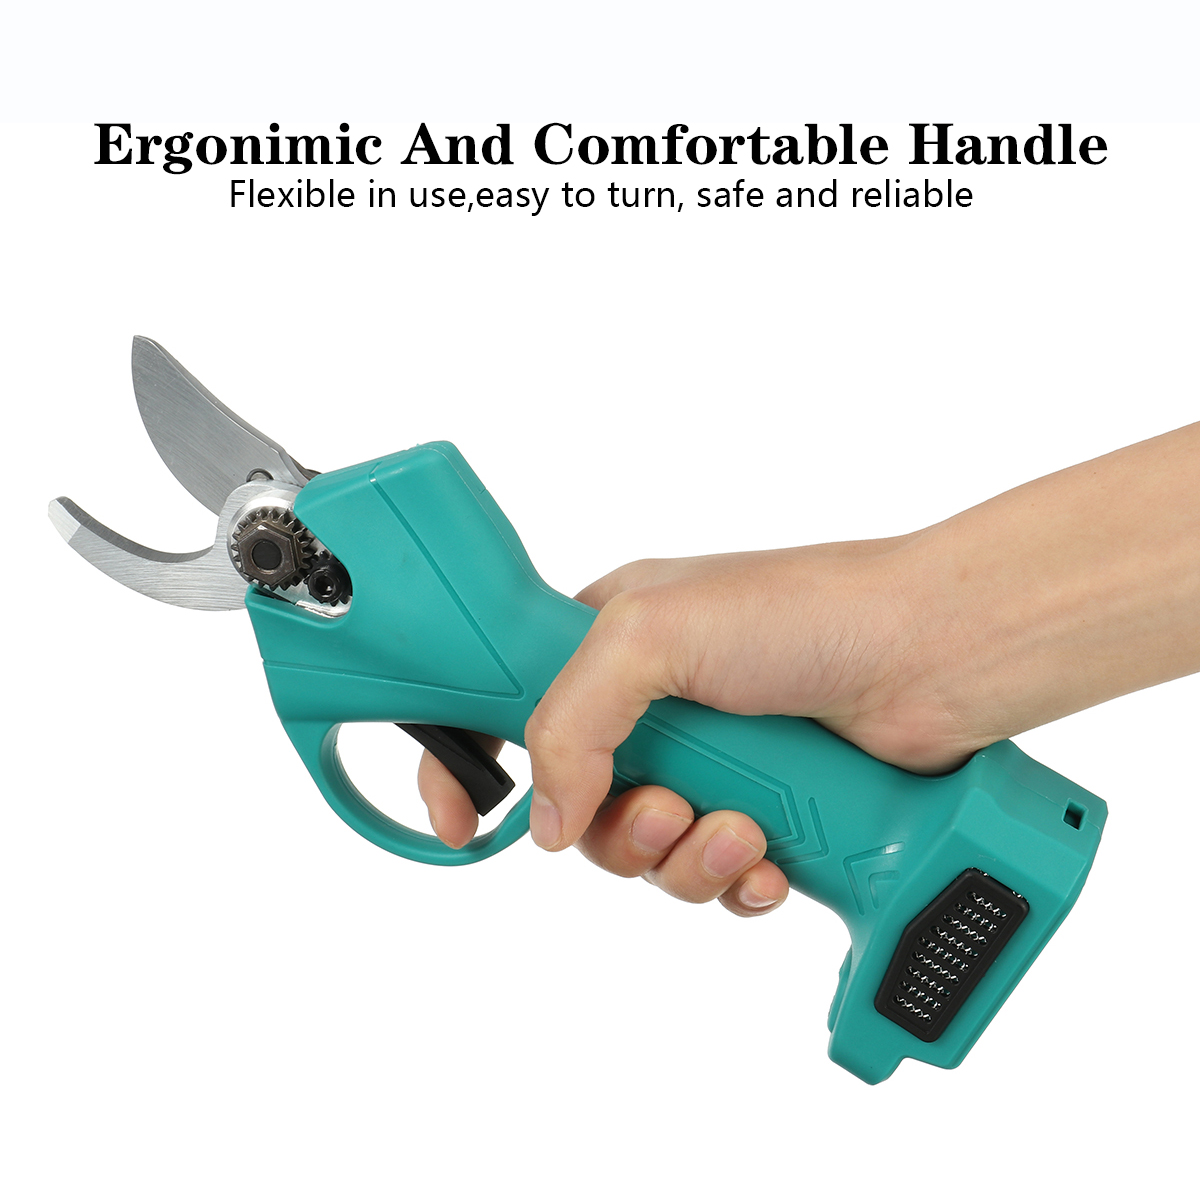 2530mm-Cordless-Electric-Branch-Scissors-Shear-Pruning-Cutter-Tool-Trimmer-For-WorxMakita-18V-21V-Ba-1816478-5